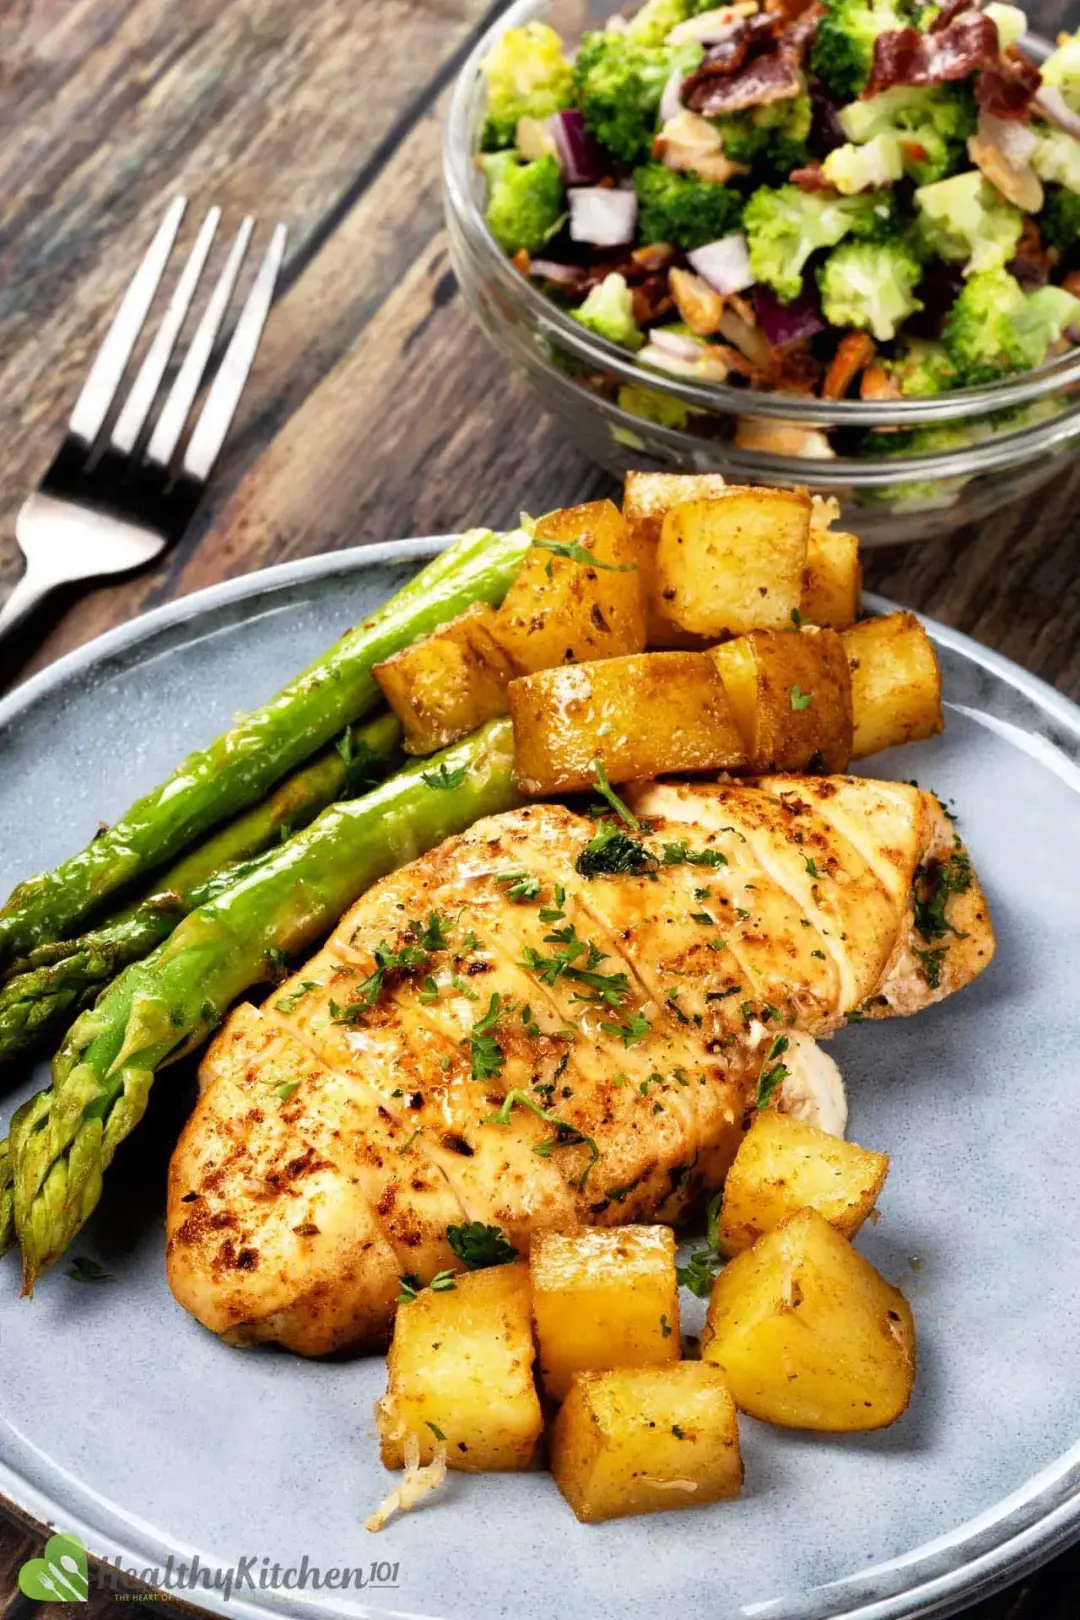 A plate of chicken breast, potato cubes, and asparagus stalks next to a small bowl of broccoli salad